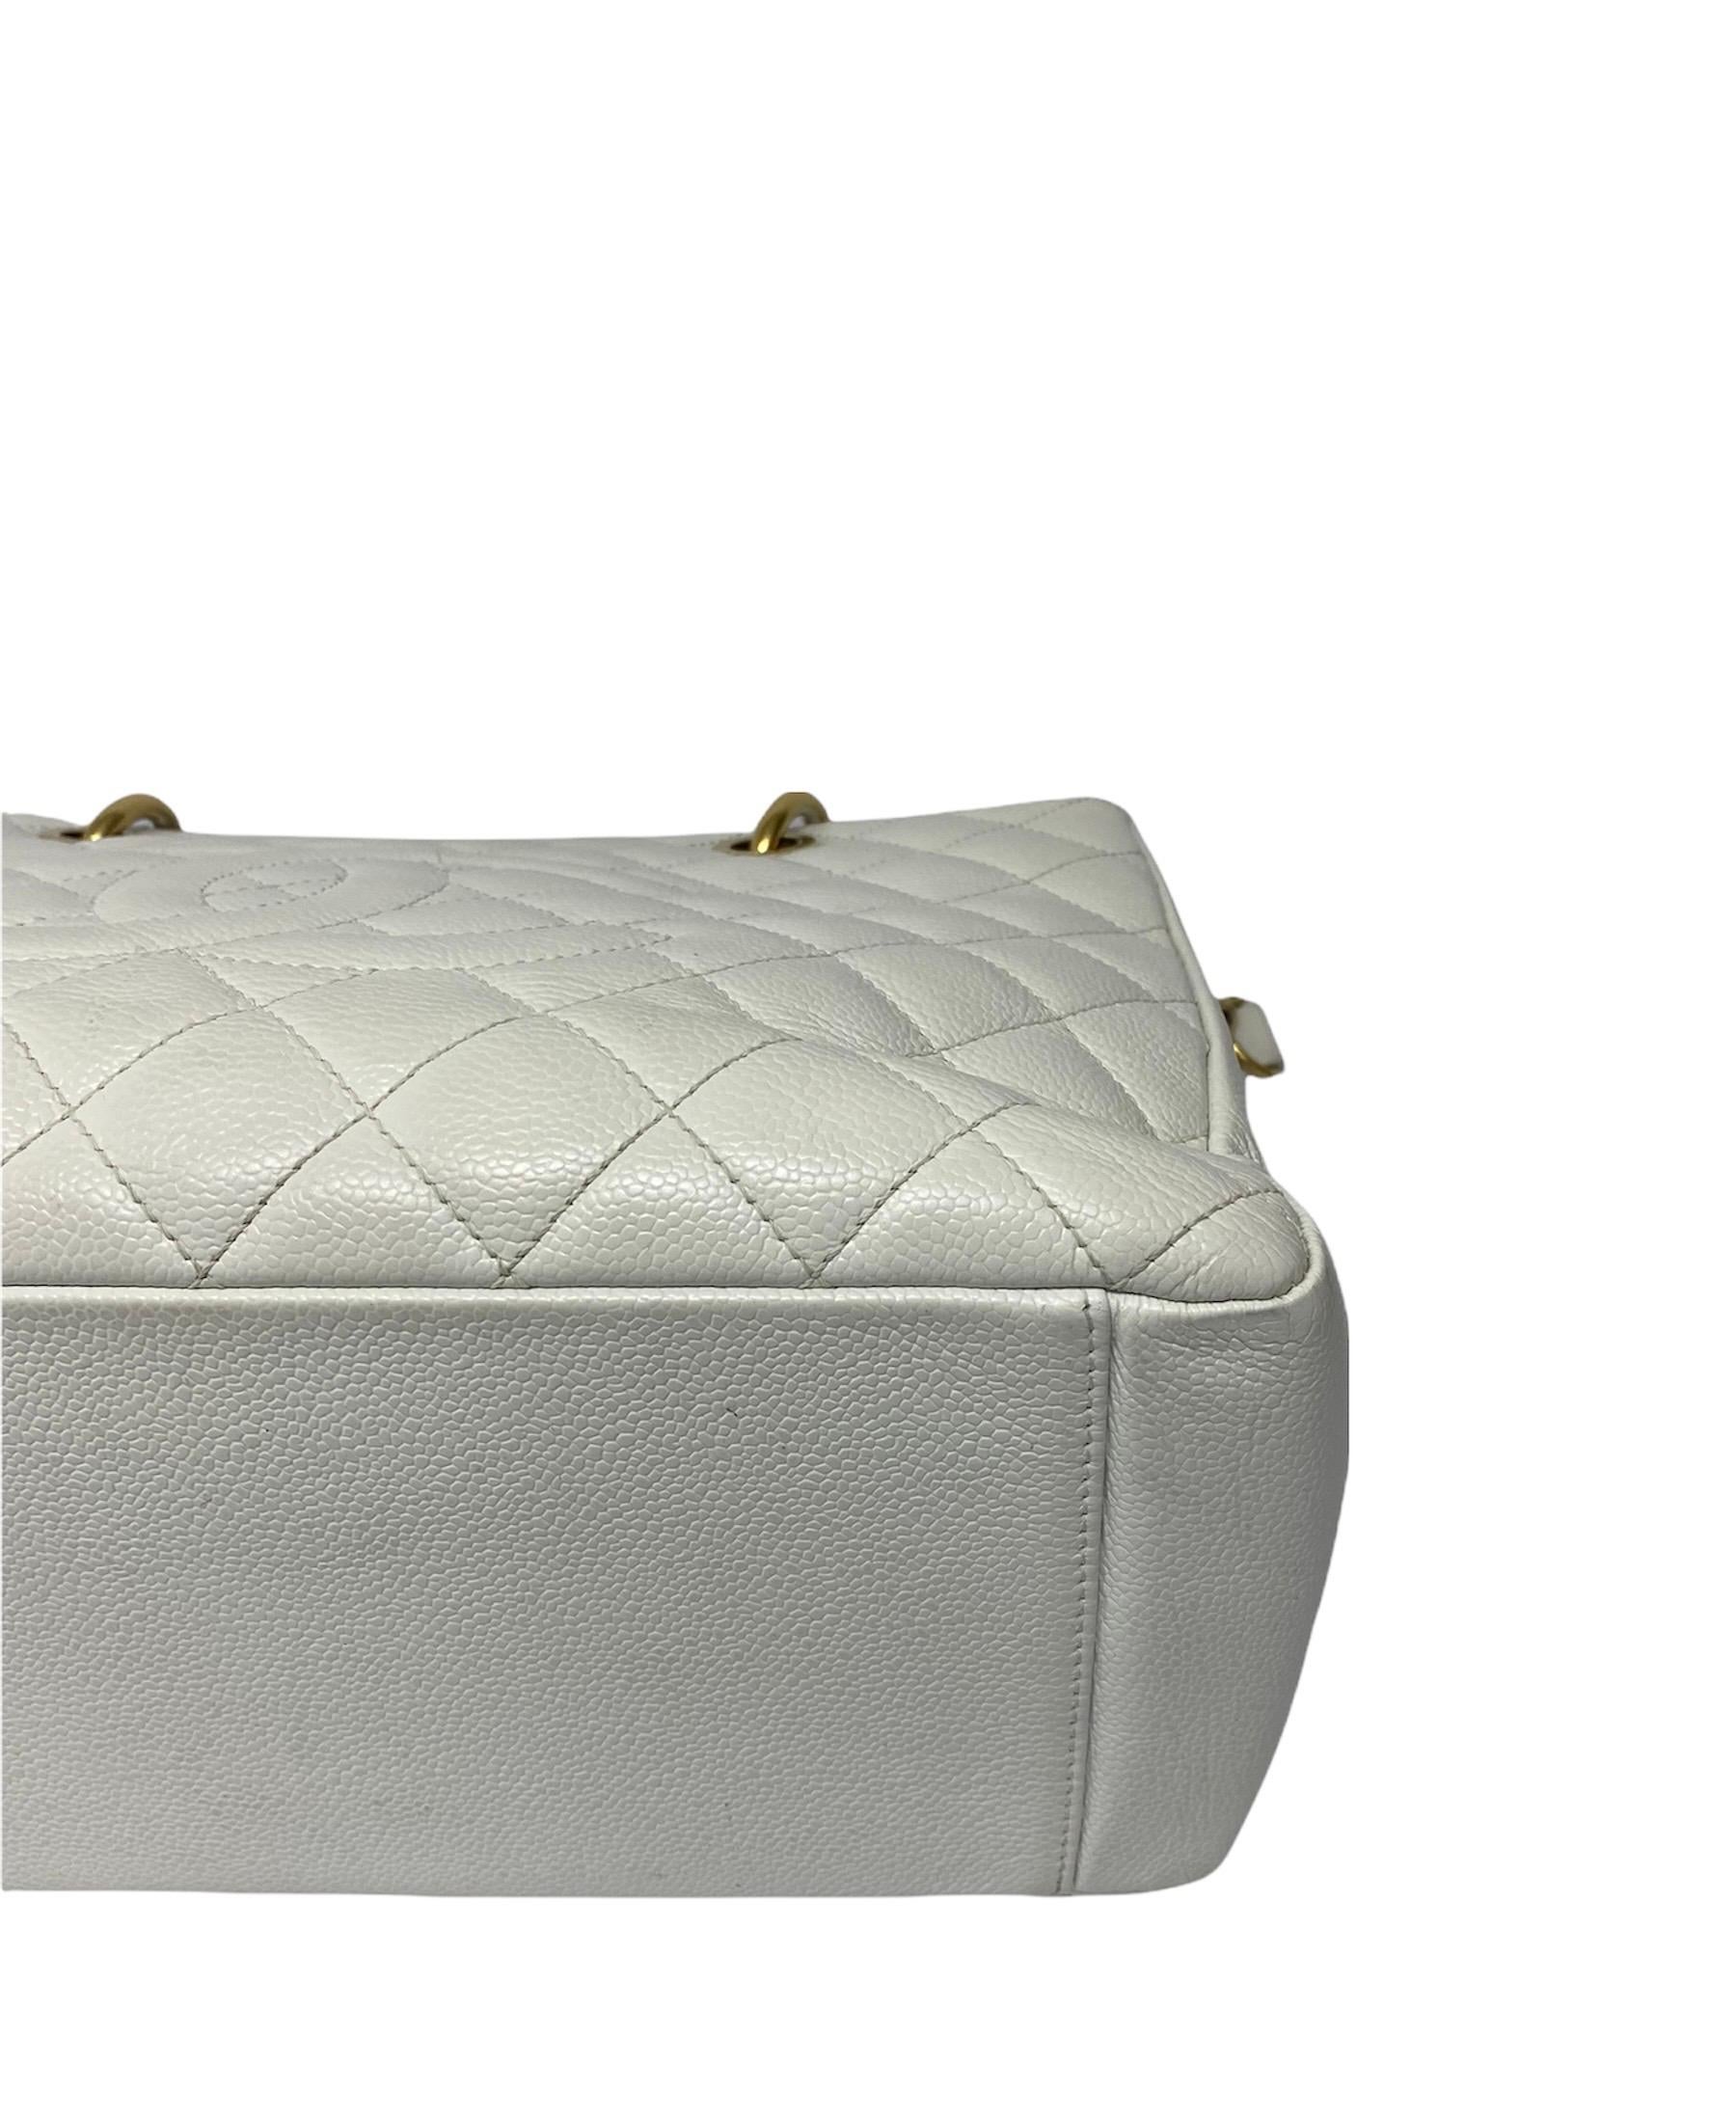 2011 Chanel White Leather GST Bag In Excellent Condition In Torre Del Greco, IT